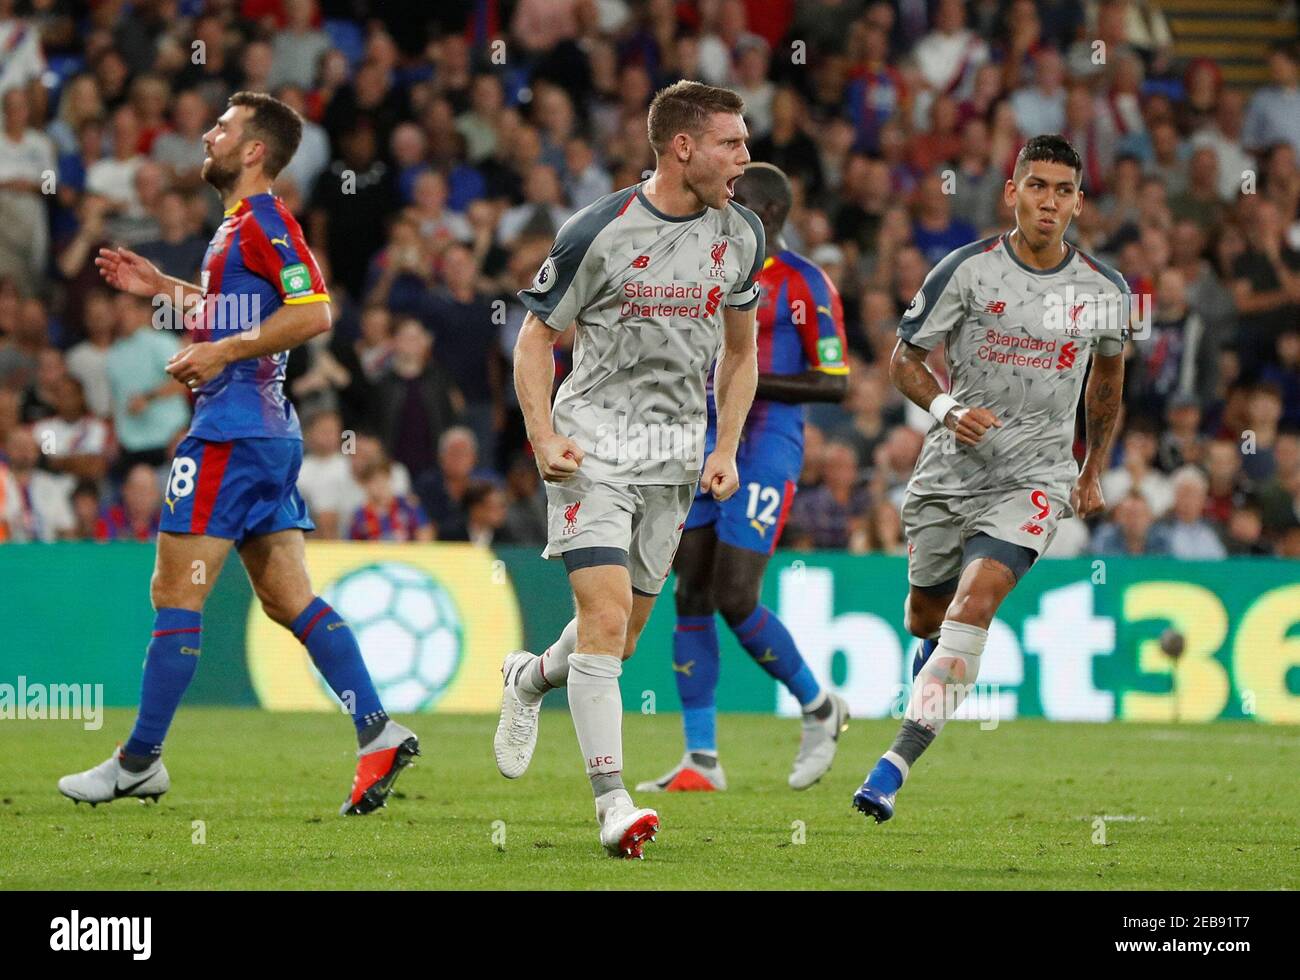 Soccer Football - Premier League - Crystal Palace v Liverpool - Selhurst Park, London, Britain - August 20, 2018  Liverpool's James Milner celebrates scoring their first goal from the penalty spot with Roberto Firmino                     Action Images via Reuters/John Sibley  EDITORIAL USE ONLY. No use with unauthorized audio, video, data, fixture lists, club/league logos or 'live' services. Online in-match use limited to 75 images, no video emulation. No use in betting, games or single club/league/player publications.  Please contact your account representative for further details. Stock Photo